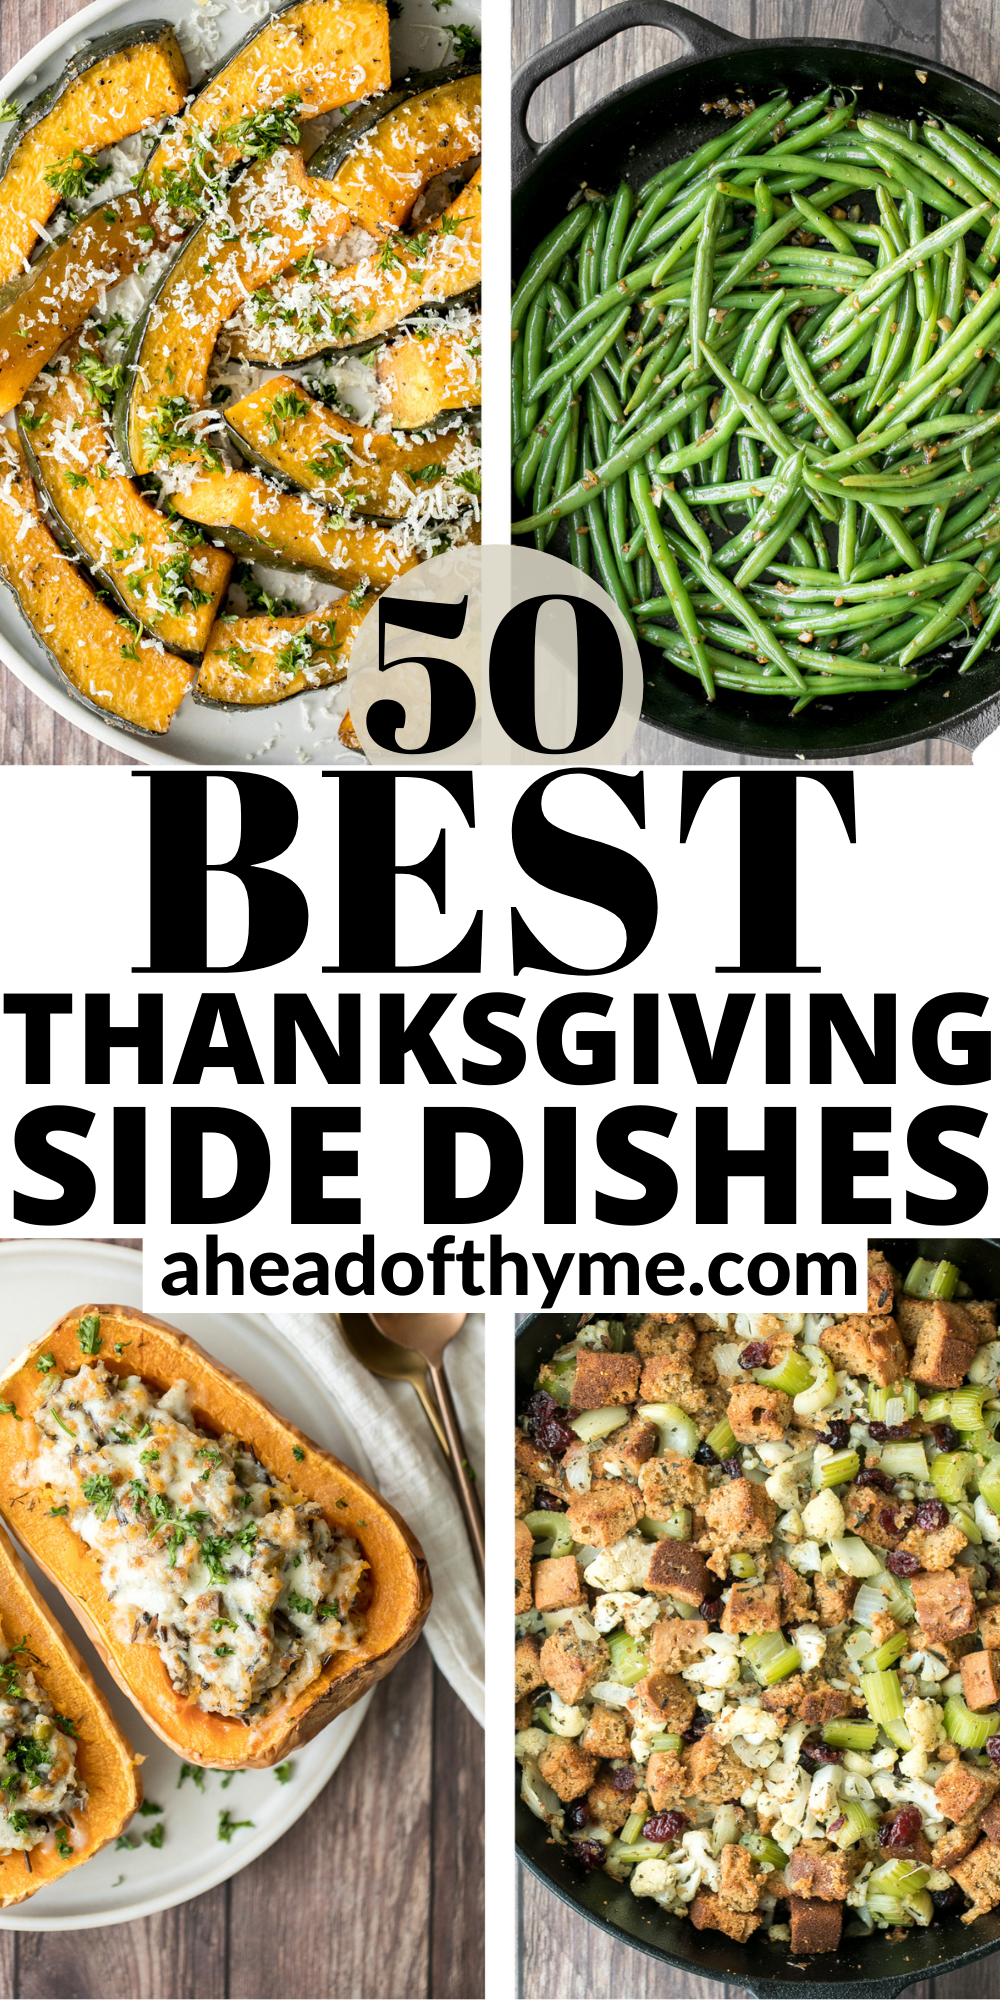 50 Best Thanksgiving Side Dishes - 50 Best Thanksgiving Side Dishes -   17 thanksgiving sides ideas